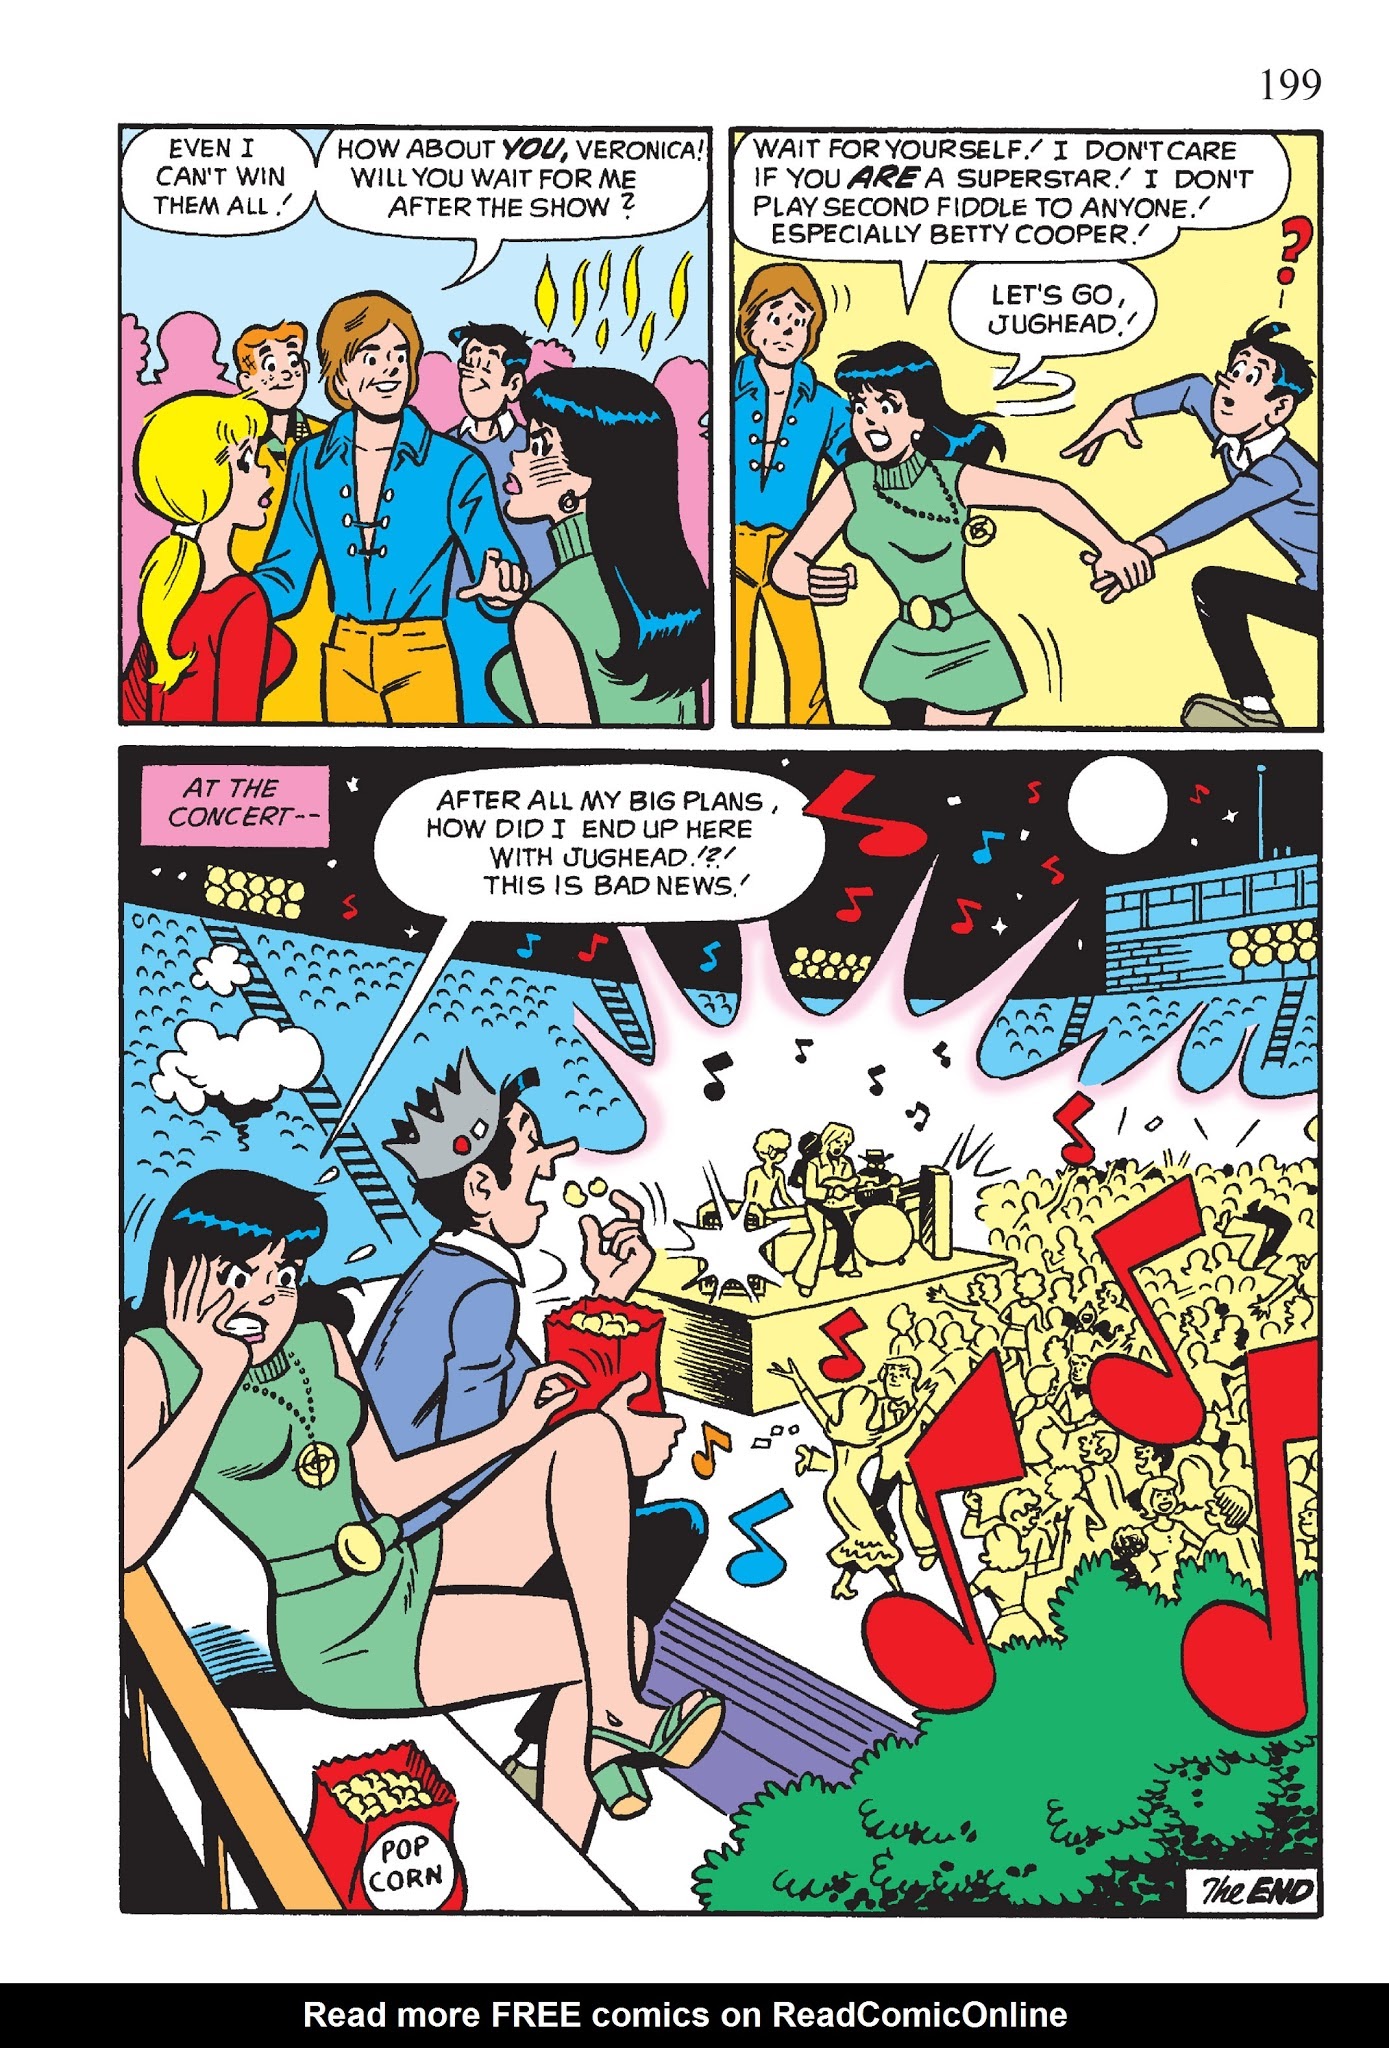 Archie Comics Porn Pov - The Best Of Archie Comics Betty Veronica Tpb 1 Part 3 | Read The Best Of Archie  Comics Betty Veronica Tpb 1 Part 3 comic online in high quality. Read Full  Comic